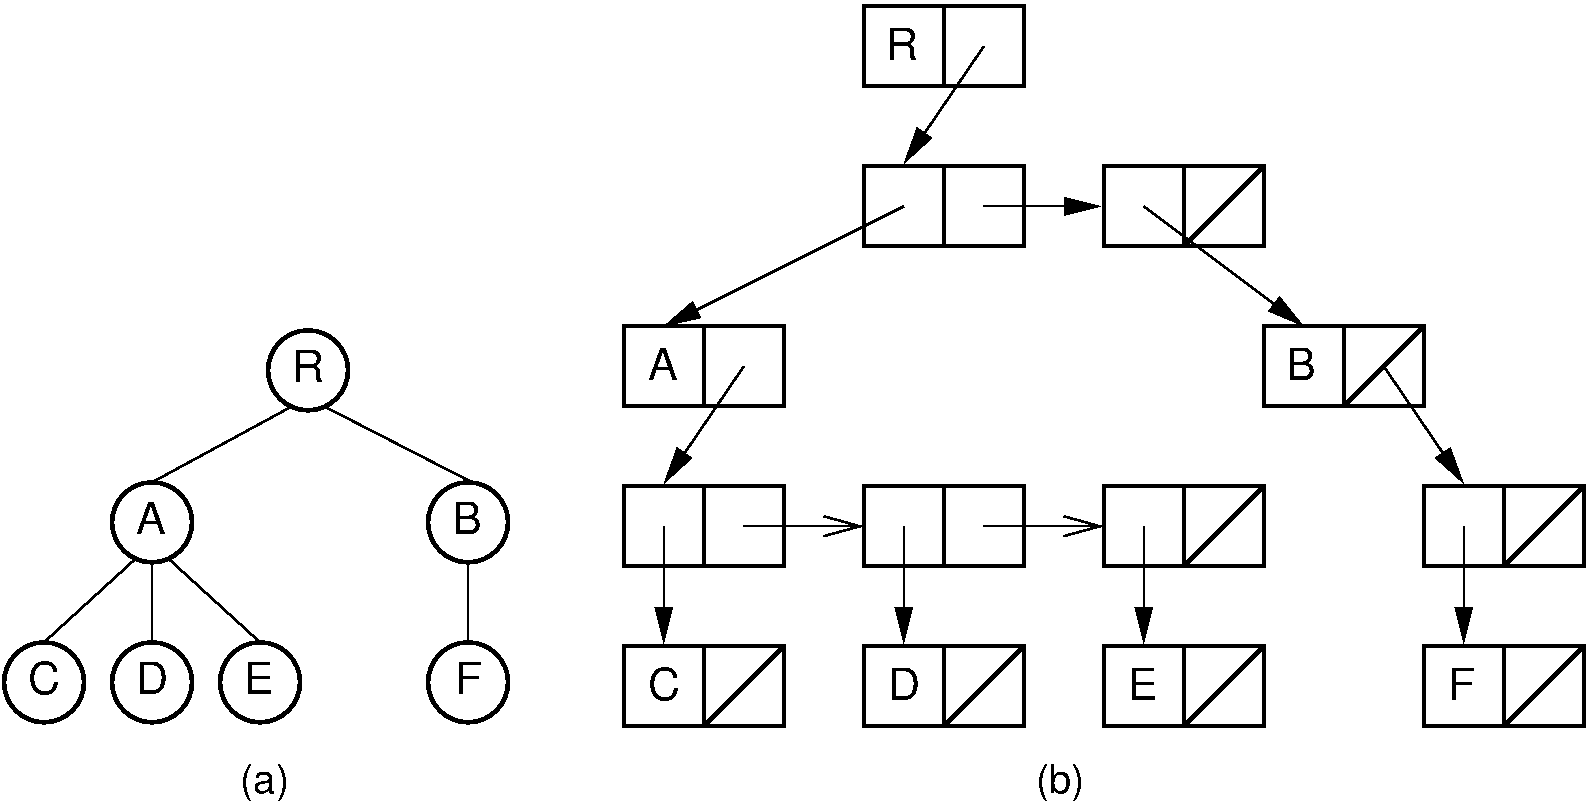 A dynamic general tree with linked lists of child pointers